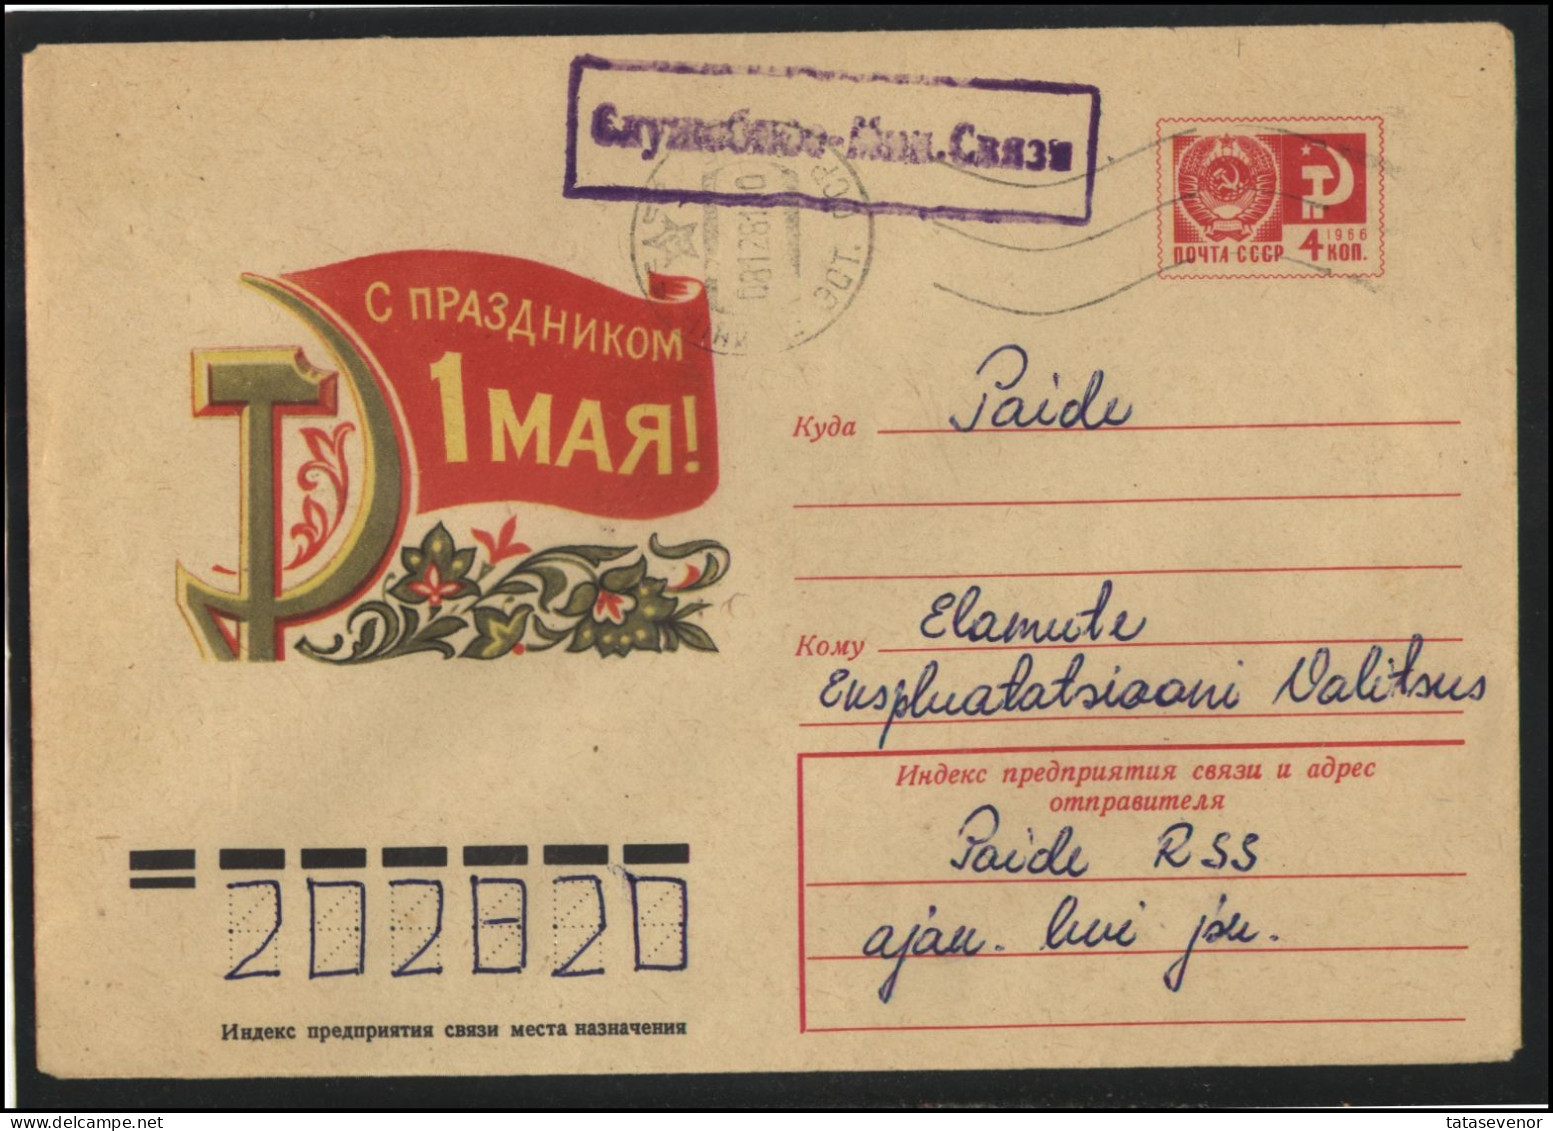 RUSSIA USSR Stationery ESTONIA USED AMBL 1380 PAIDE May Day Celebration - Sin Clasificación